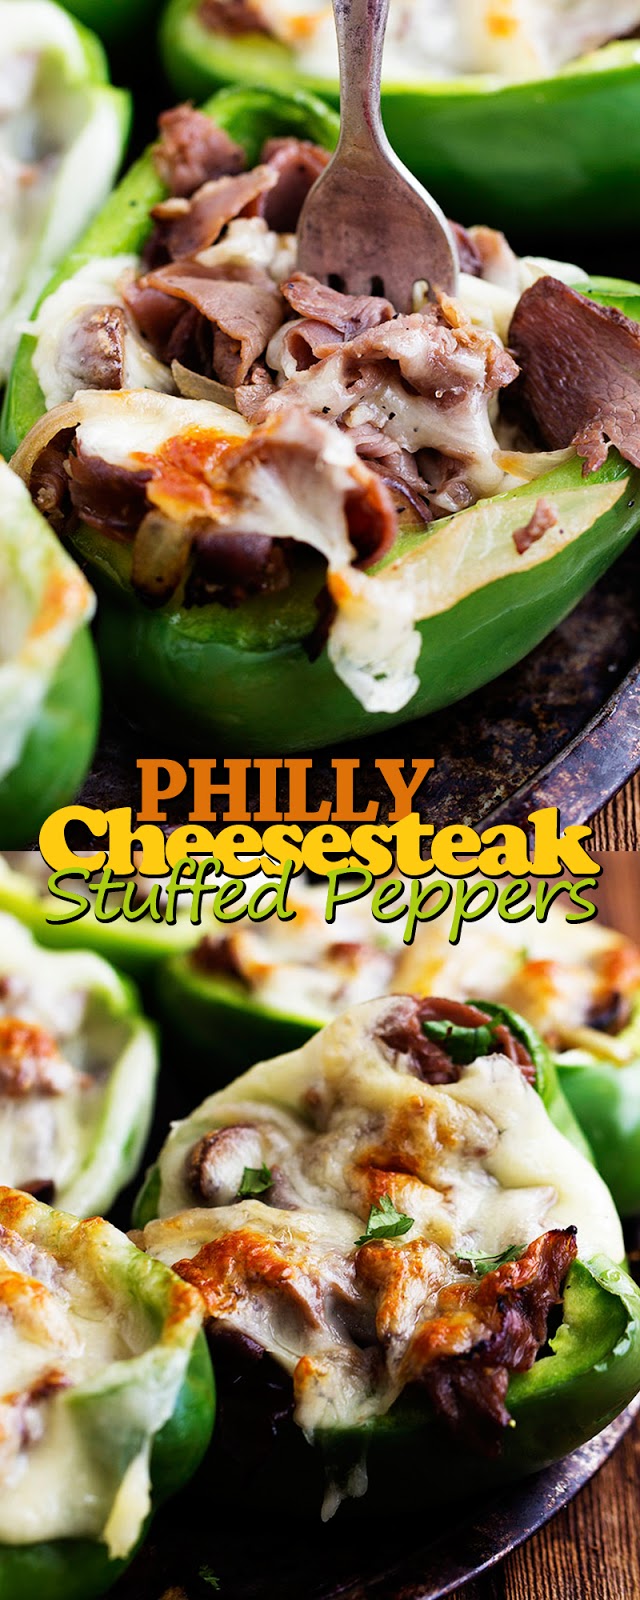 PHILLY CHEESESTEAK STUFFED PEPPERS